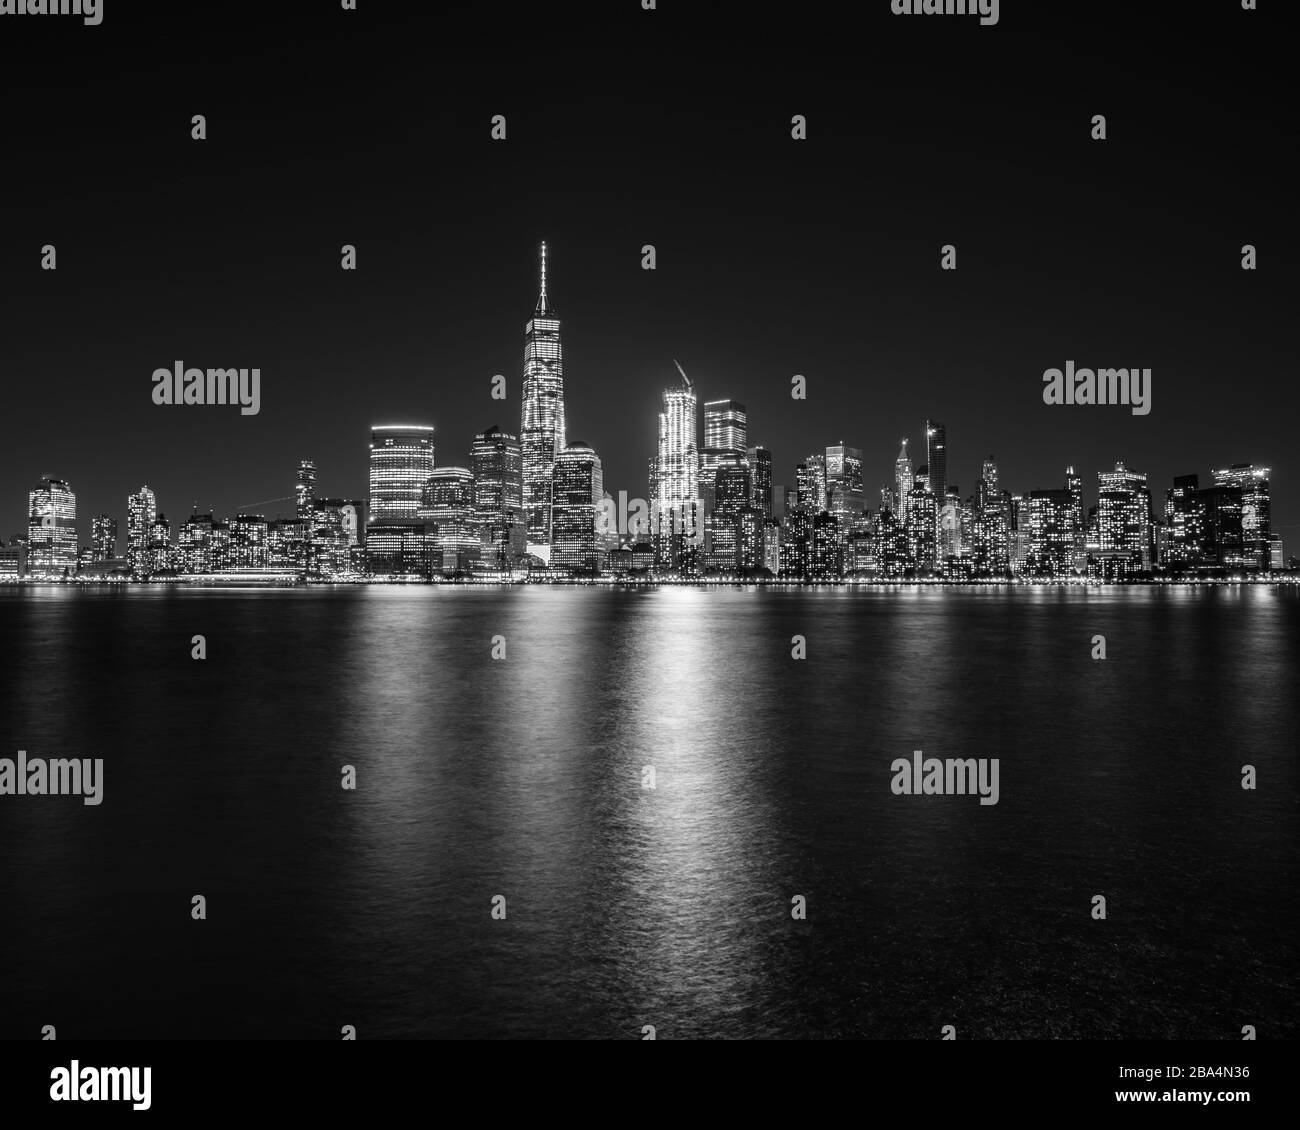 New York City skyline in dramatic black and white with Freedom Tower and reflections in the Hudson River. Stock Photo